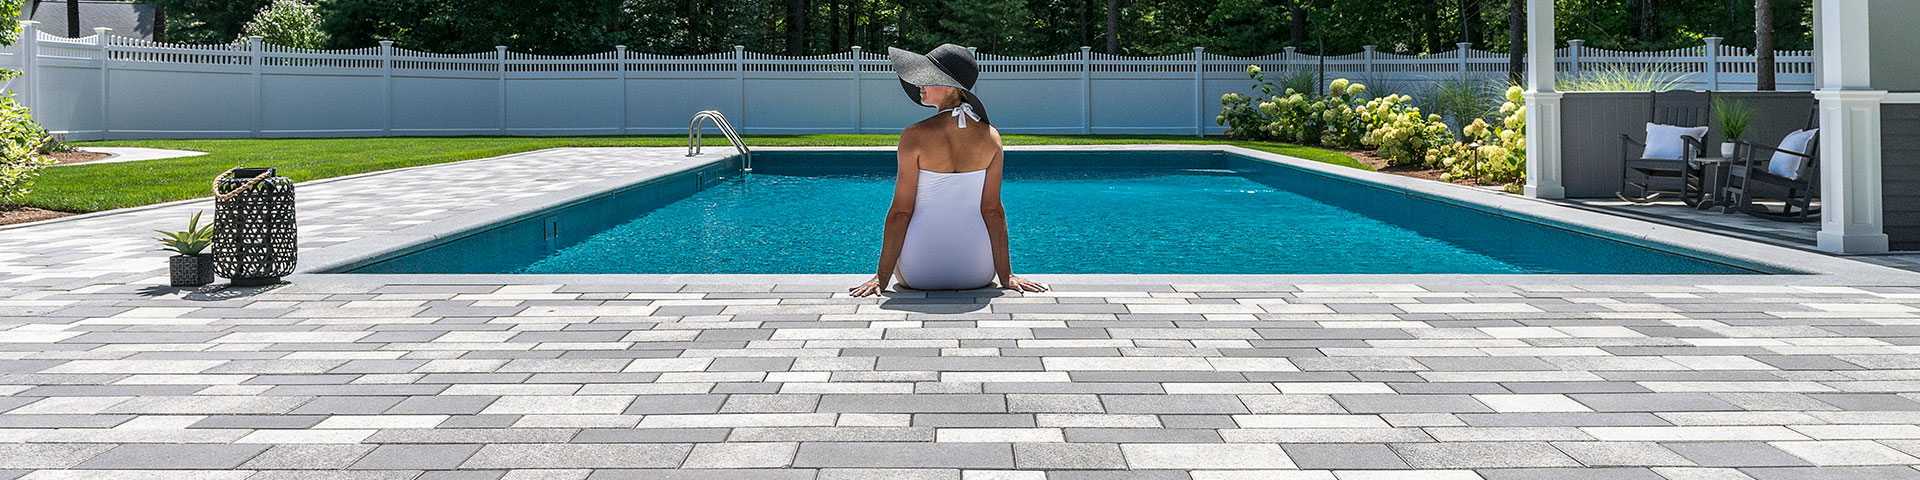 Person Sitting on Unilock Pool Deck with feet in the Pool